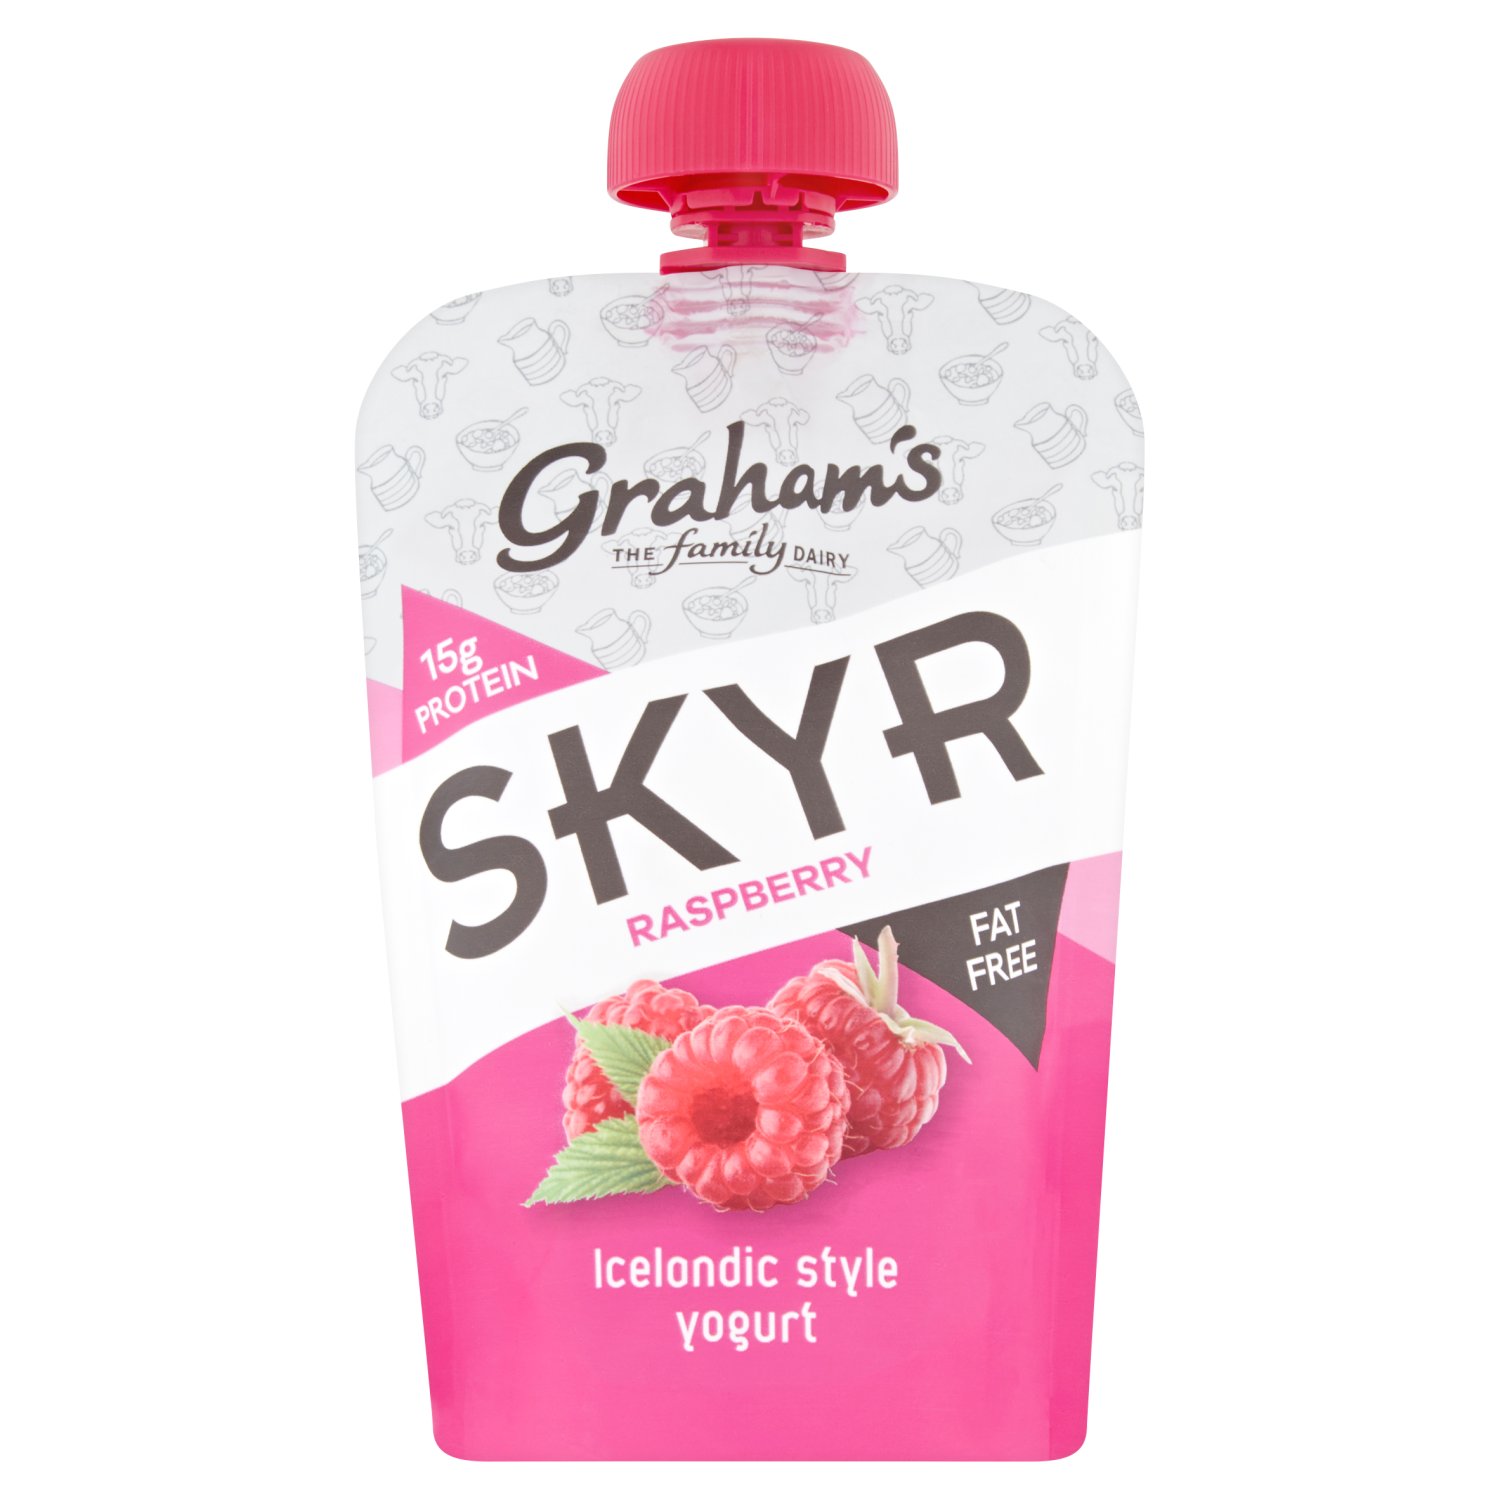 Our Skyr Icelandic style yogurts are made from pure Scottish milk and carefully sourced fruit, they're fat free, high in protein and 30% less sugar than other flavoured yogurts. Extraordinarily tasty and packed with gut friendly live bacteria they are the perfect choice for your family.
The Grahams